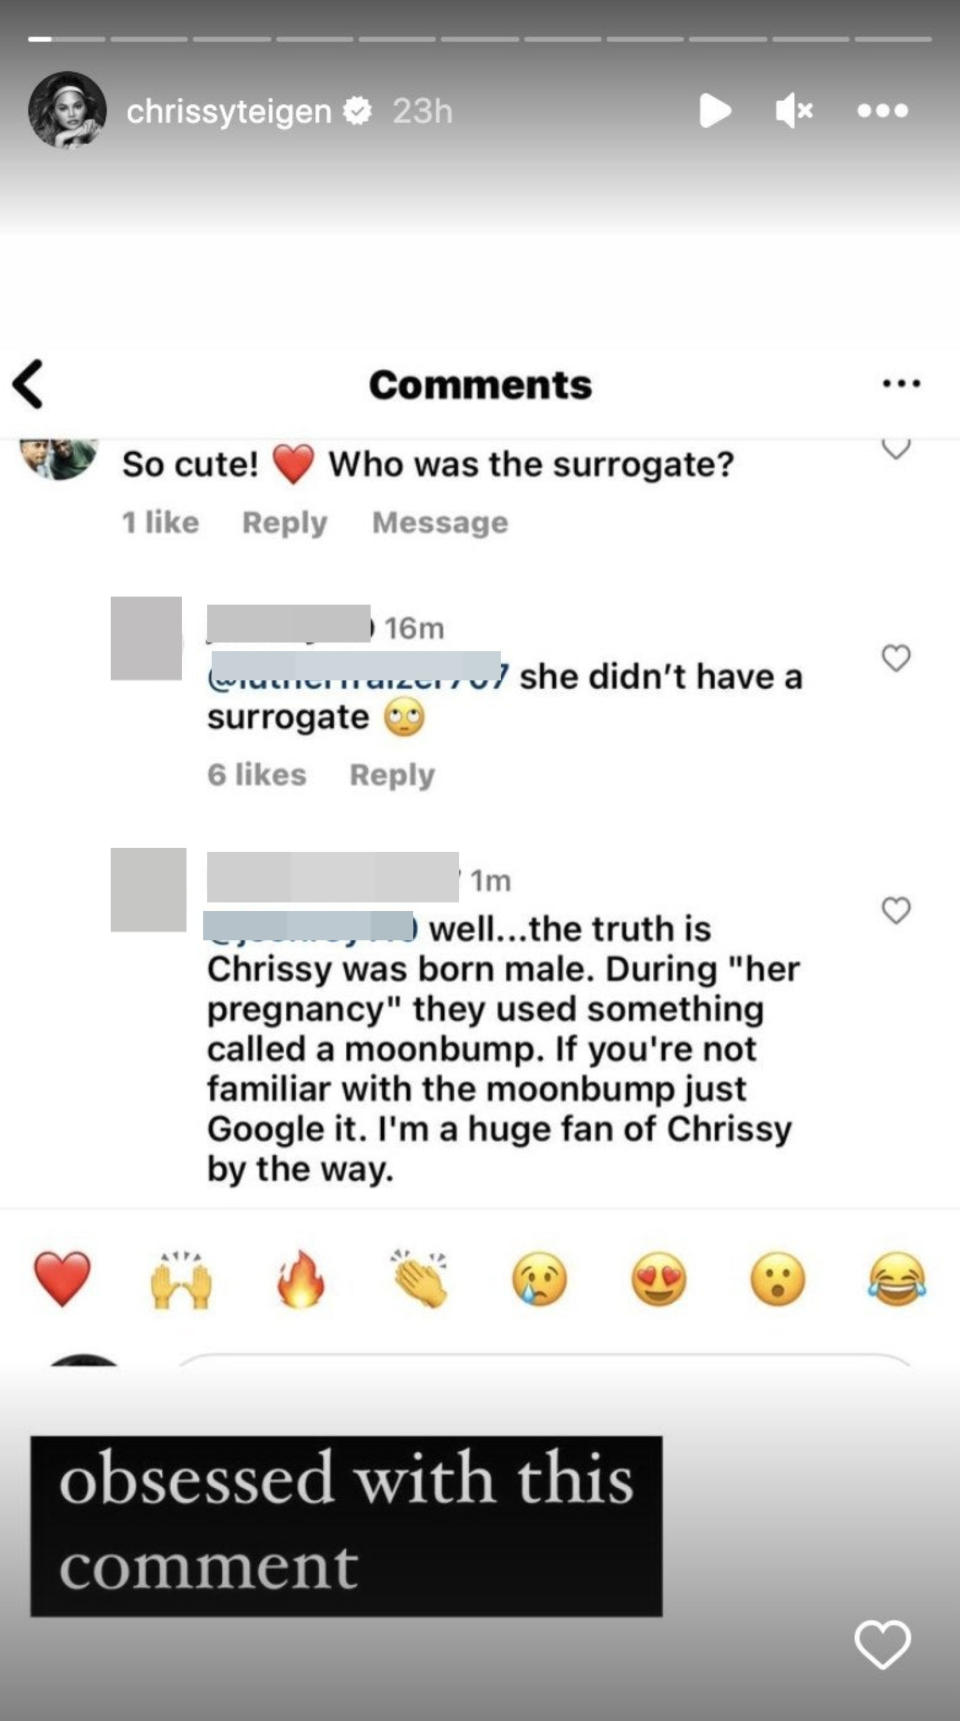 A screenshot of Chrissy's comment